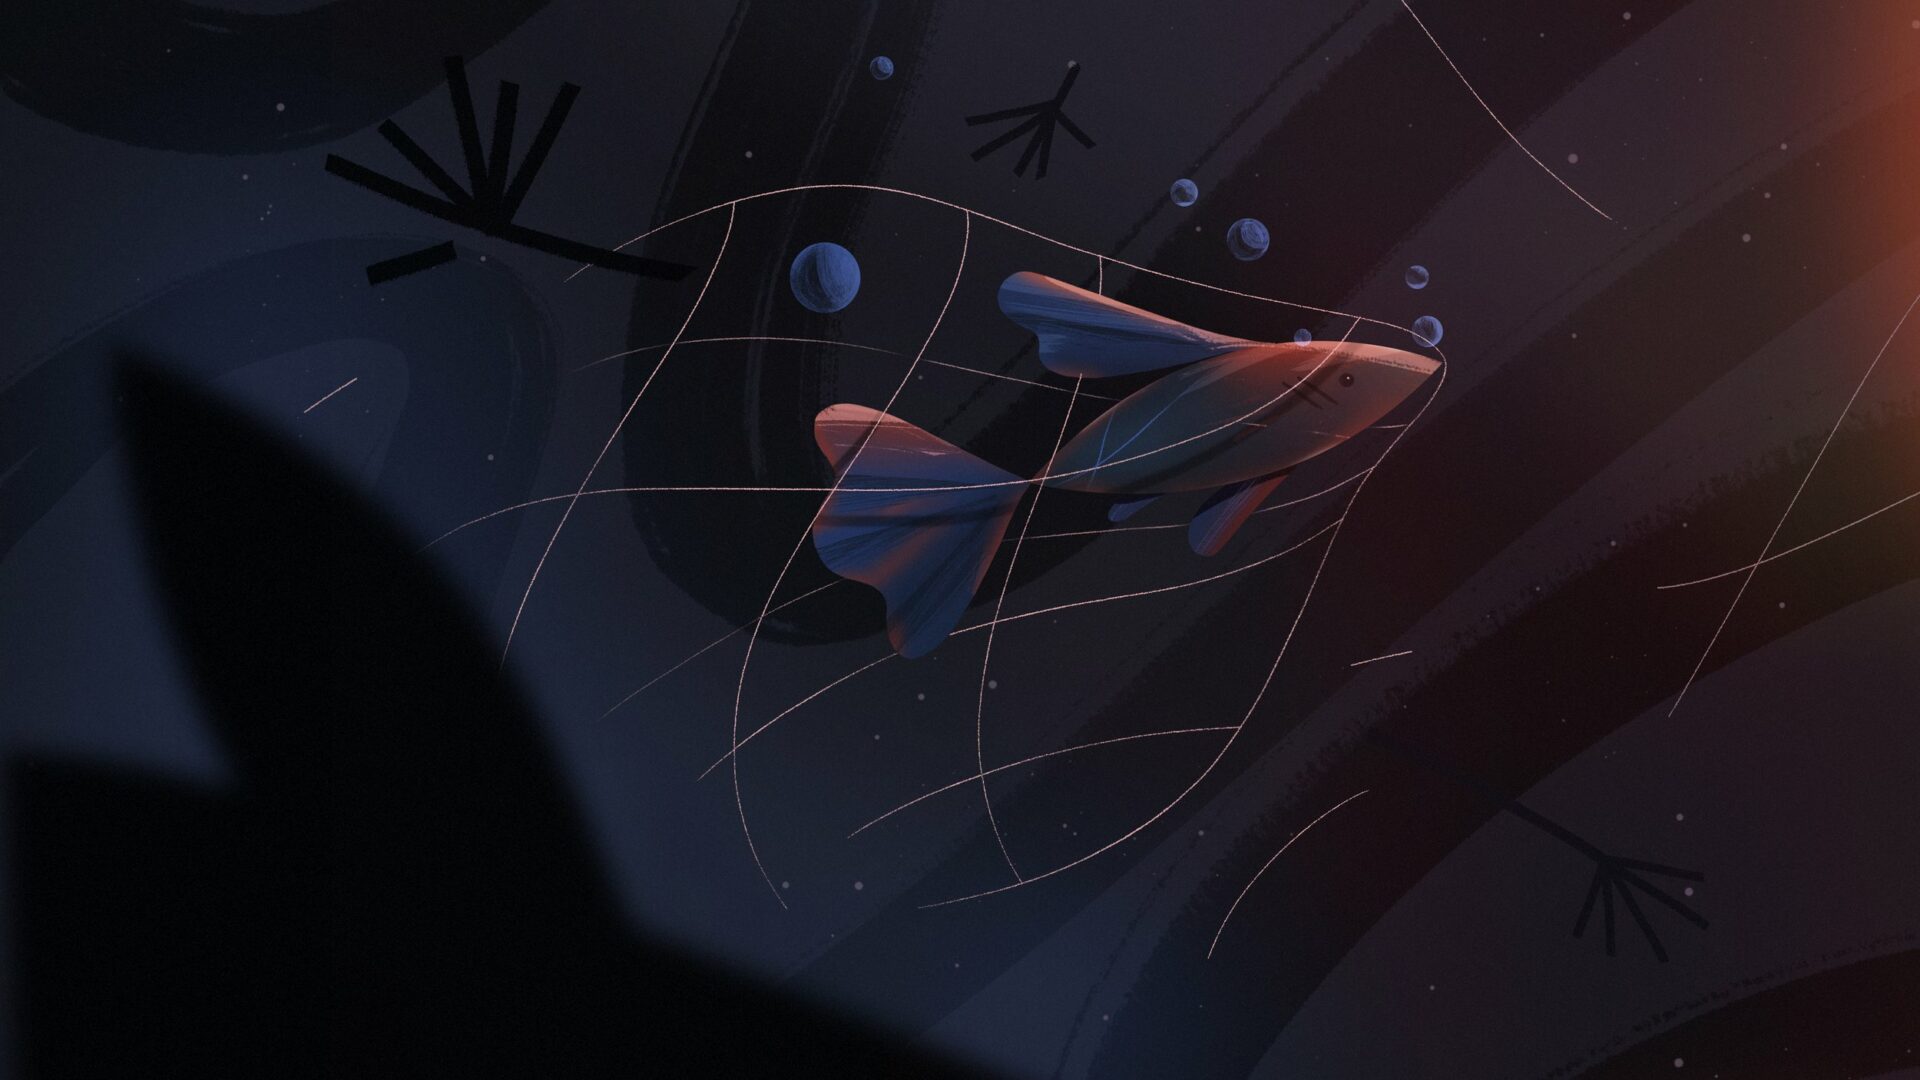 Between Lines is a Poetic Thoughtful Animated Short by Sarah Beth Morgan 4